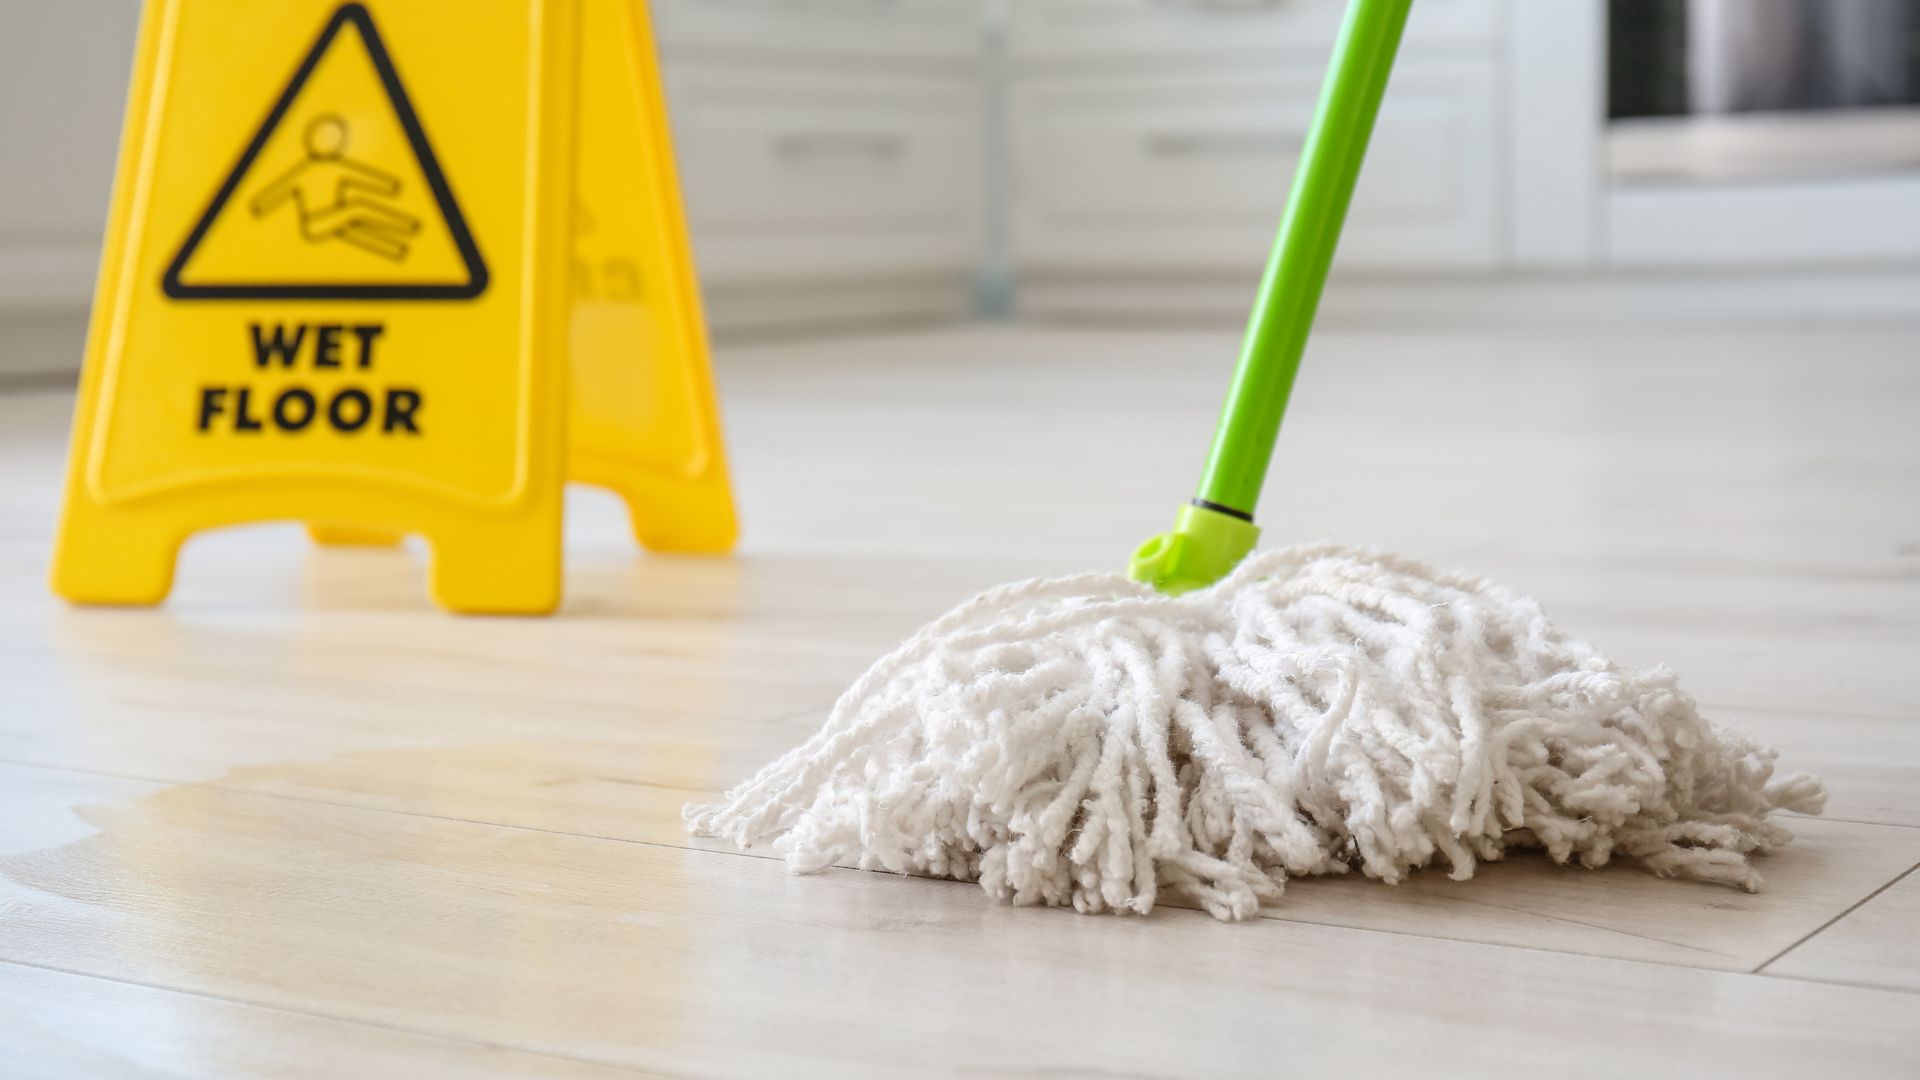 Mop and a wet floor sign